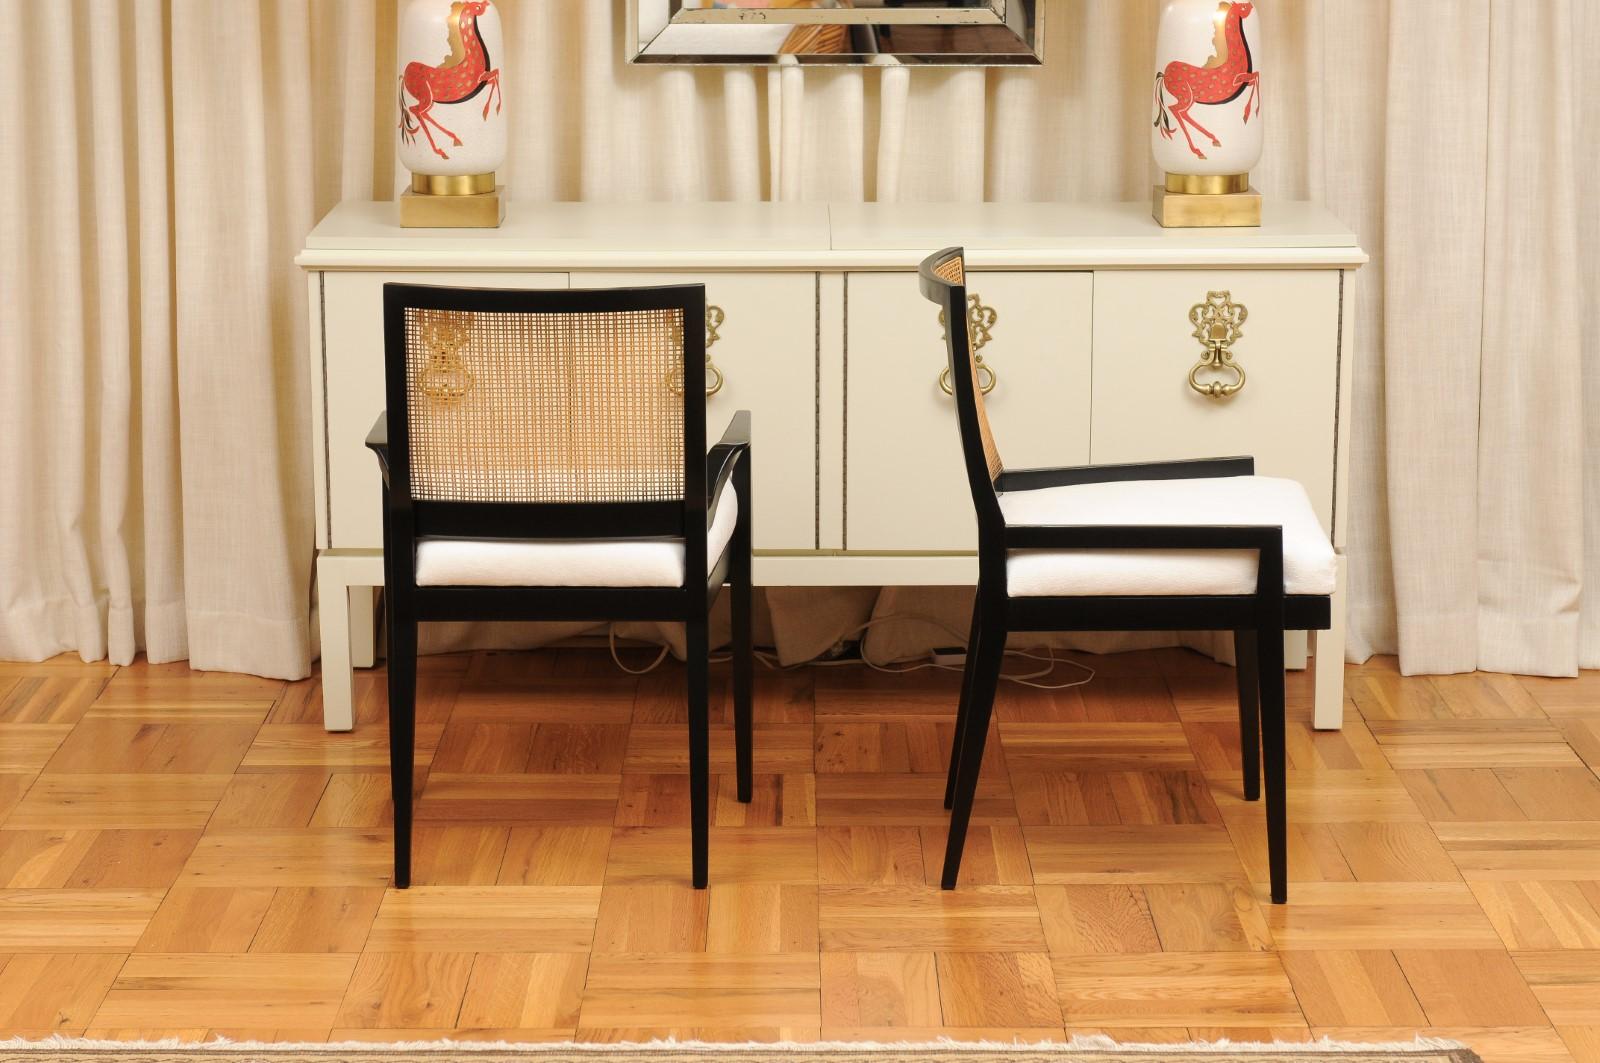 Stellar Set of 14 Black Lacquer Cane Chairs by Michael Taylor, circa 1960 For Sale 5